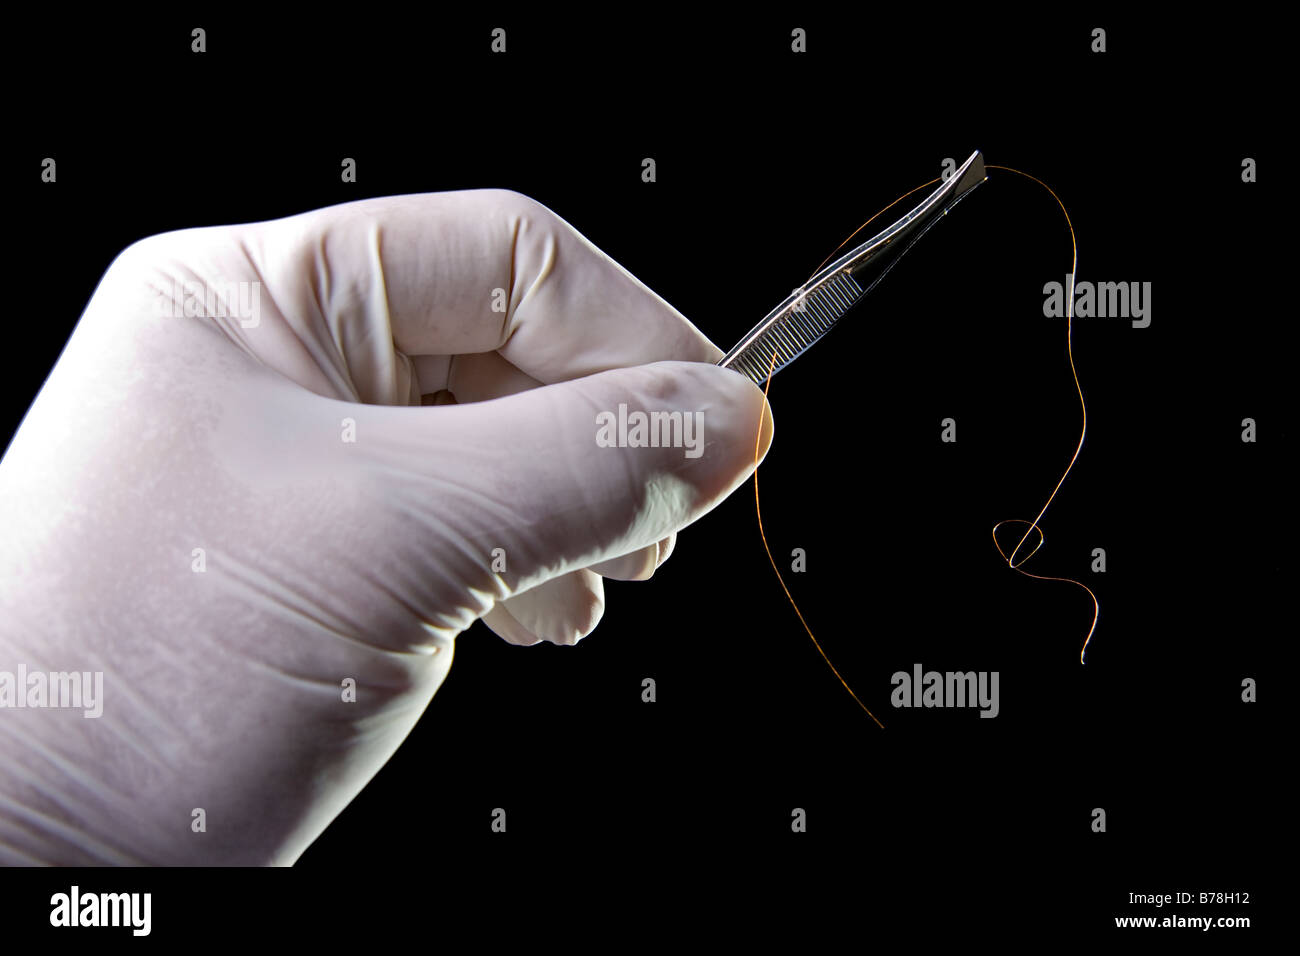 A gloved hand holds a pair of tweezers gripping a single hair Stock Photo -  Alamy